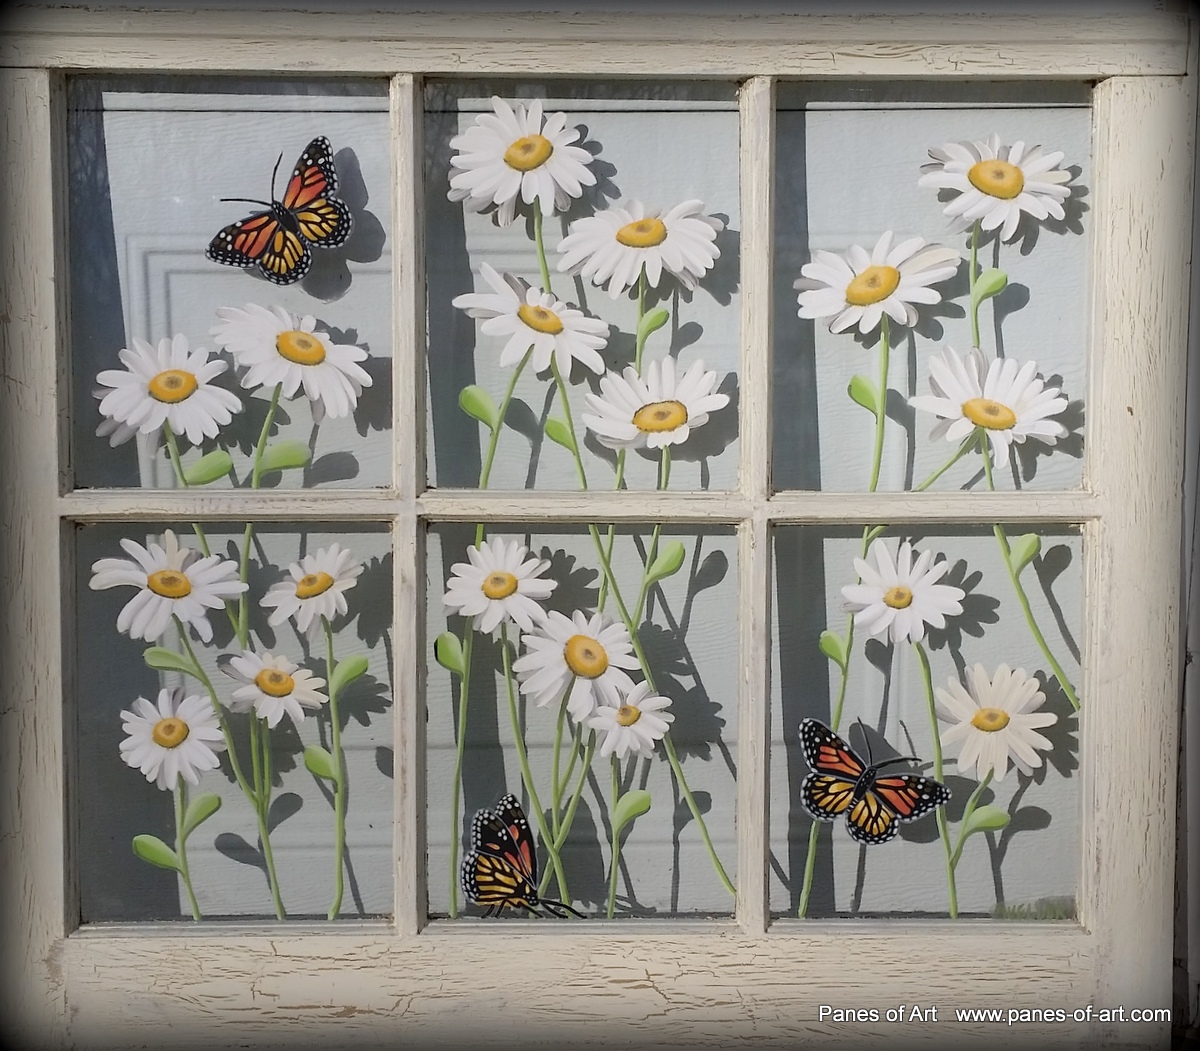 Panes of Art, Barn Quilts, Hand Painted Windows, Window Art, Chalkboard  Windows, Windows with photographs, Decorative Window Panes, upcycled windows,  Art For Sale, Michele Mueller, quotes painted on windows, window pains, folk